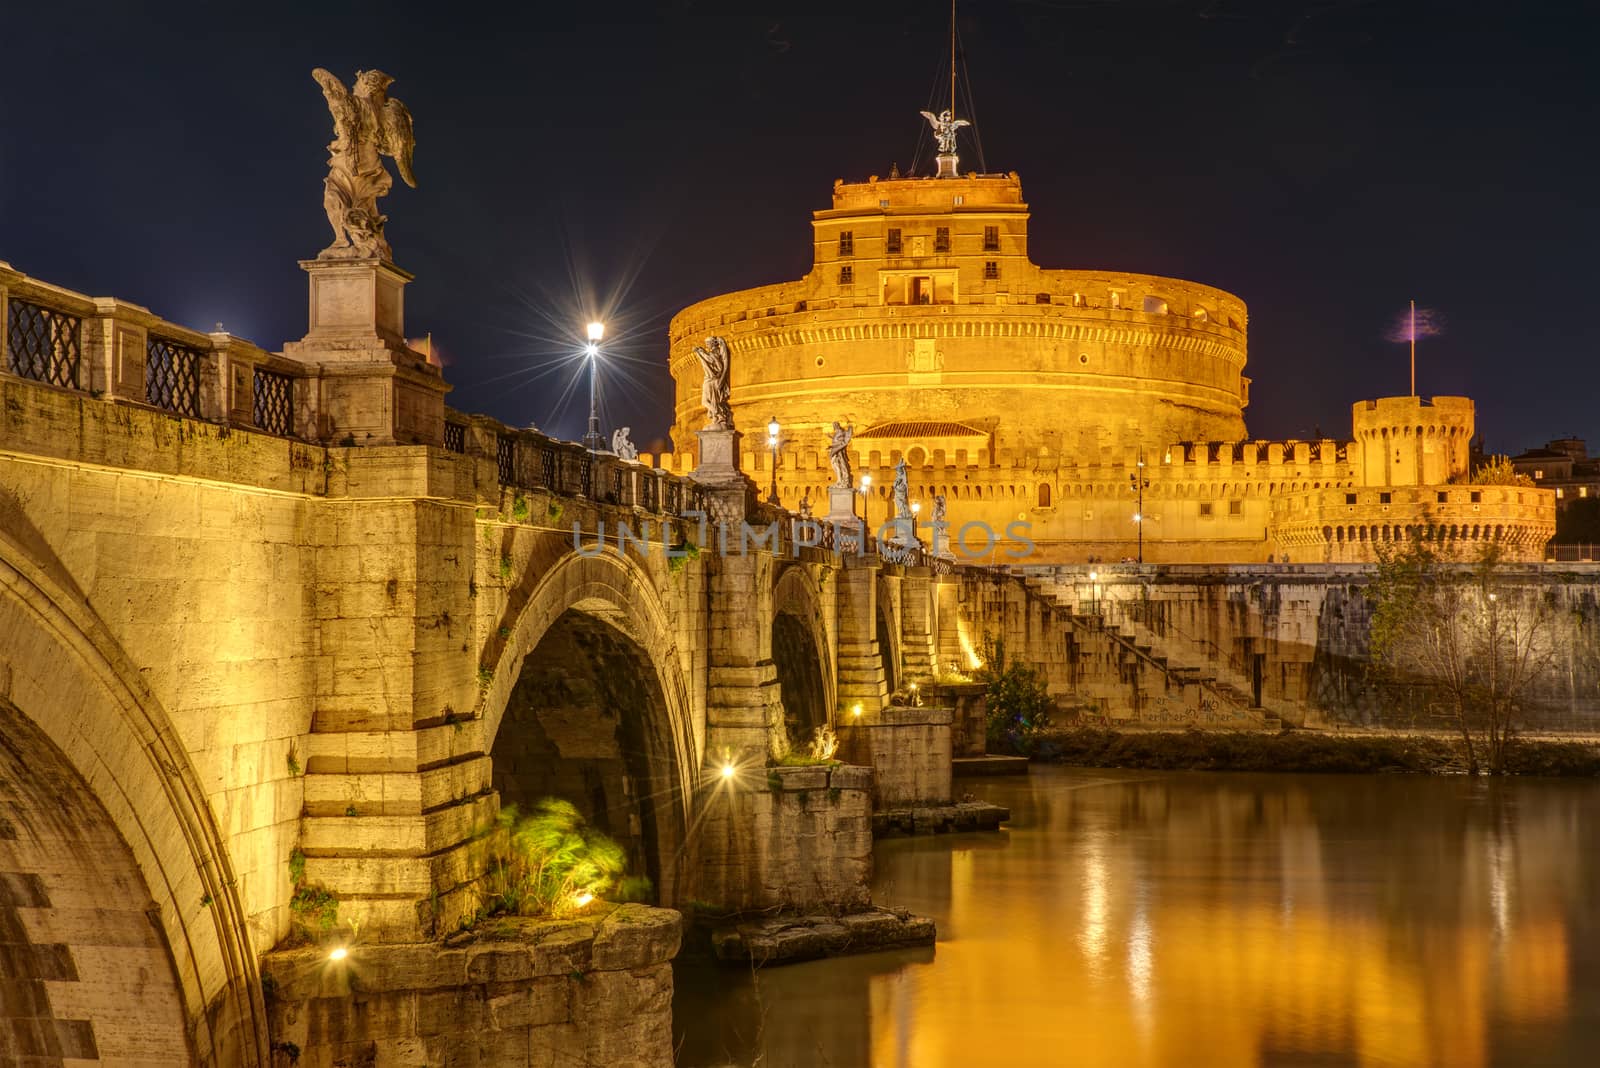 The famous Castel Sant Angelo and the Sant Angelo bridge in Rome, Italy, at night